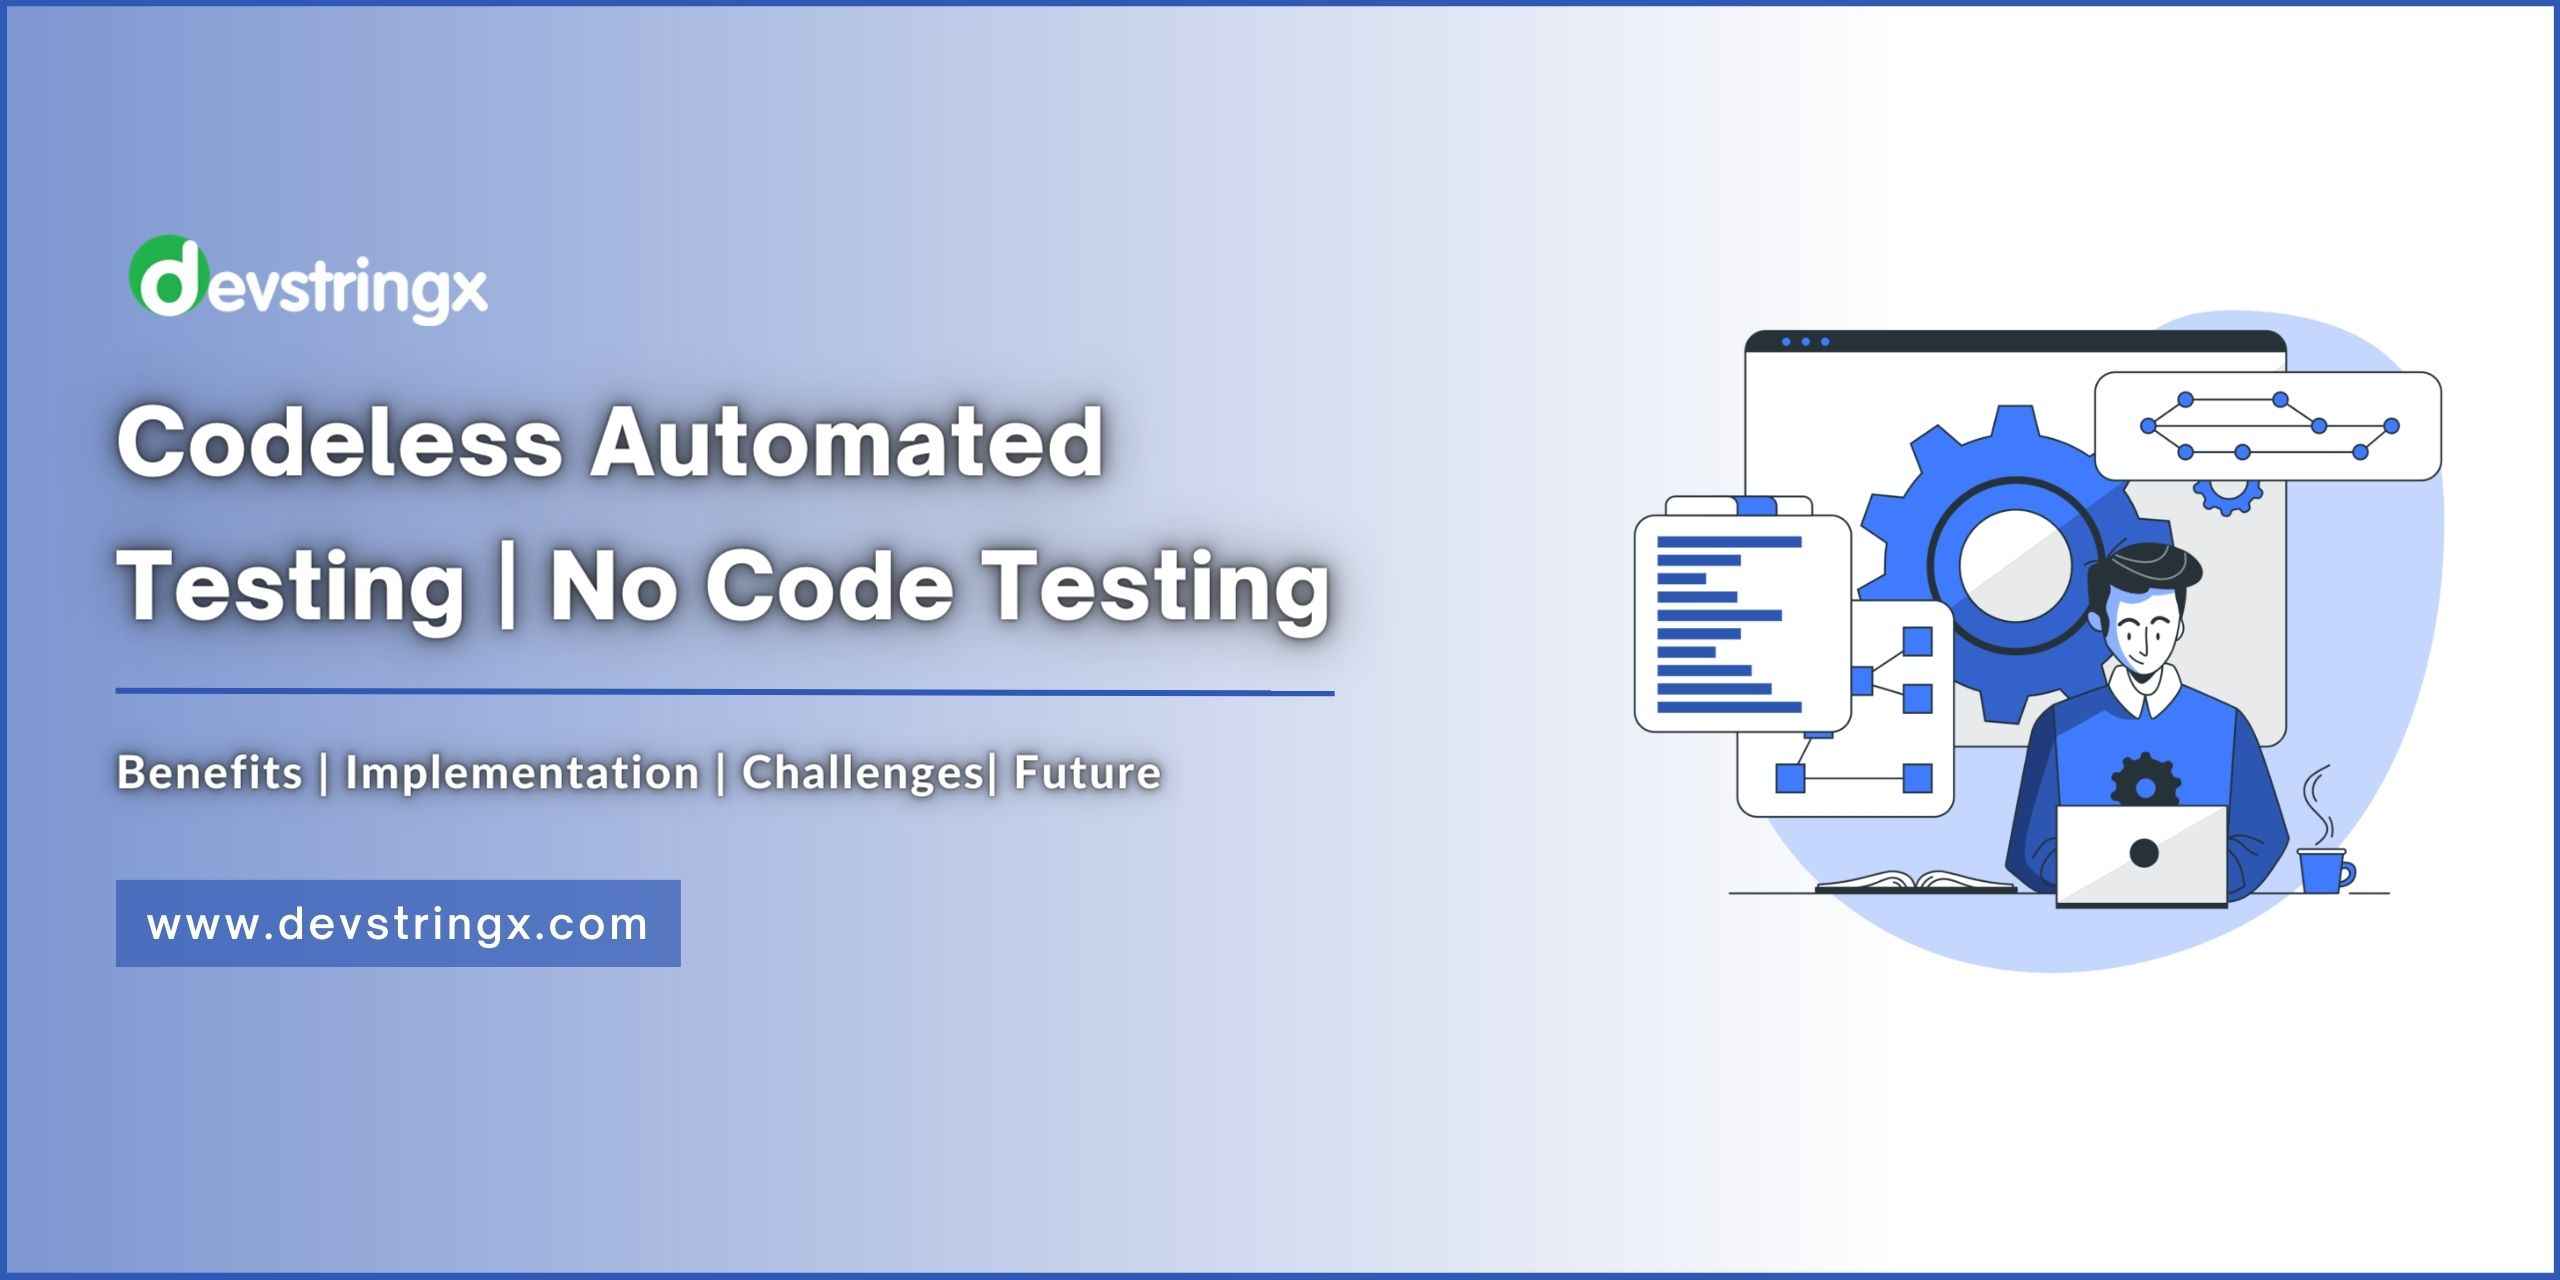 Feature image for Codeless Automated Testing blog